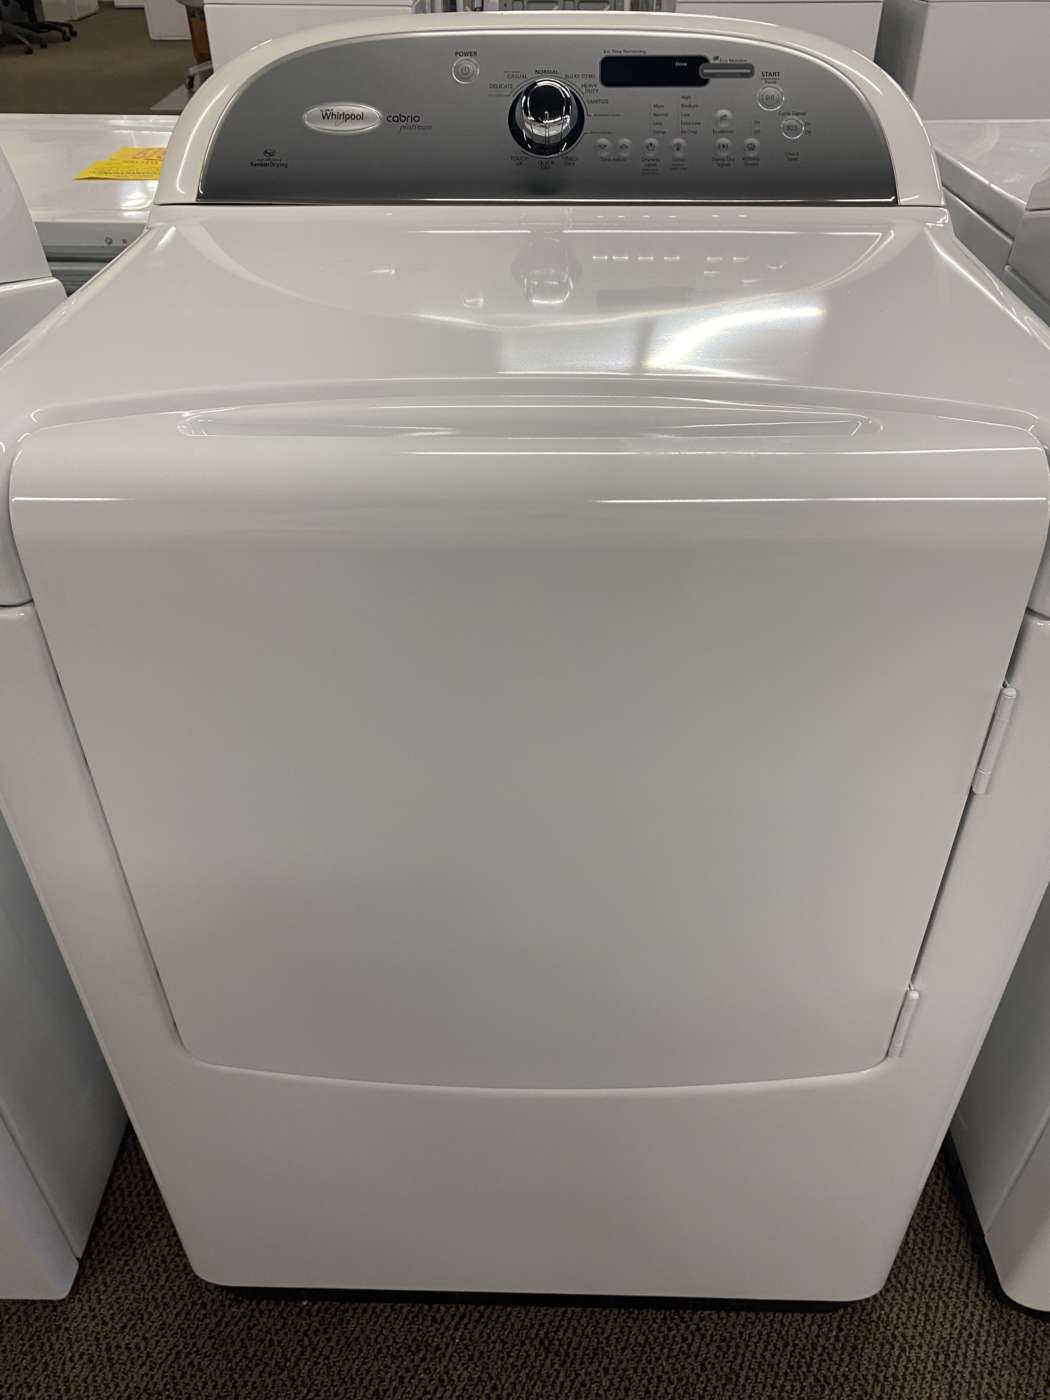 Reconditioned WHIRLPOOL 7.6 Cu. Ft. Electric Dryer – White